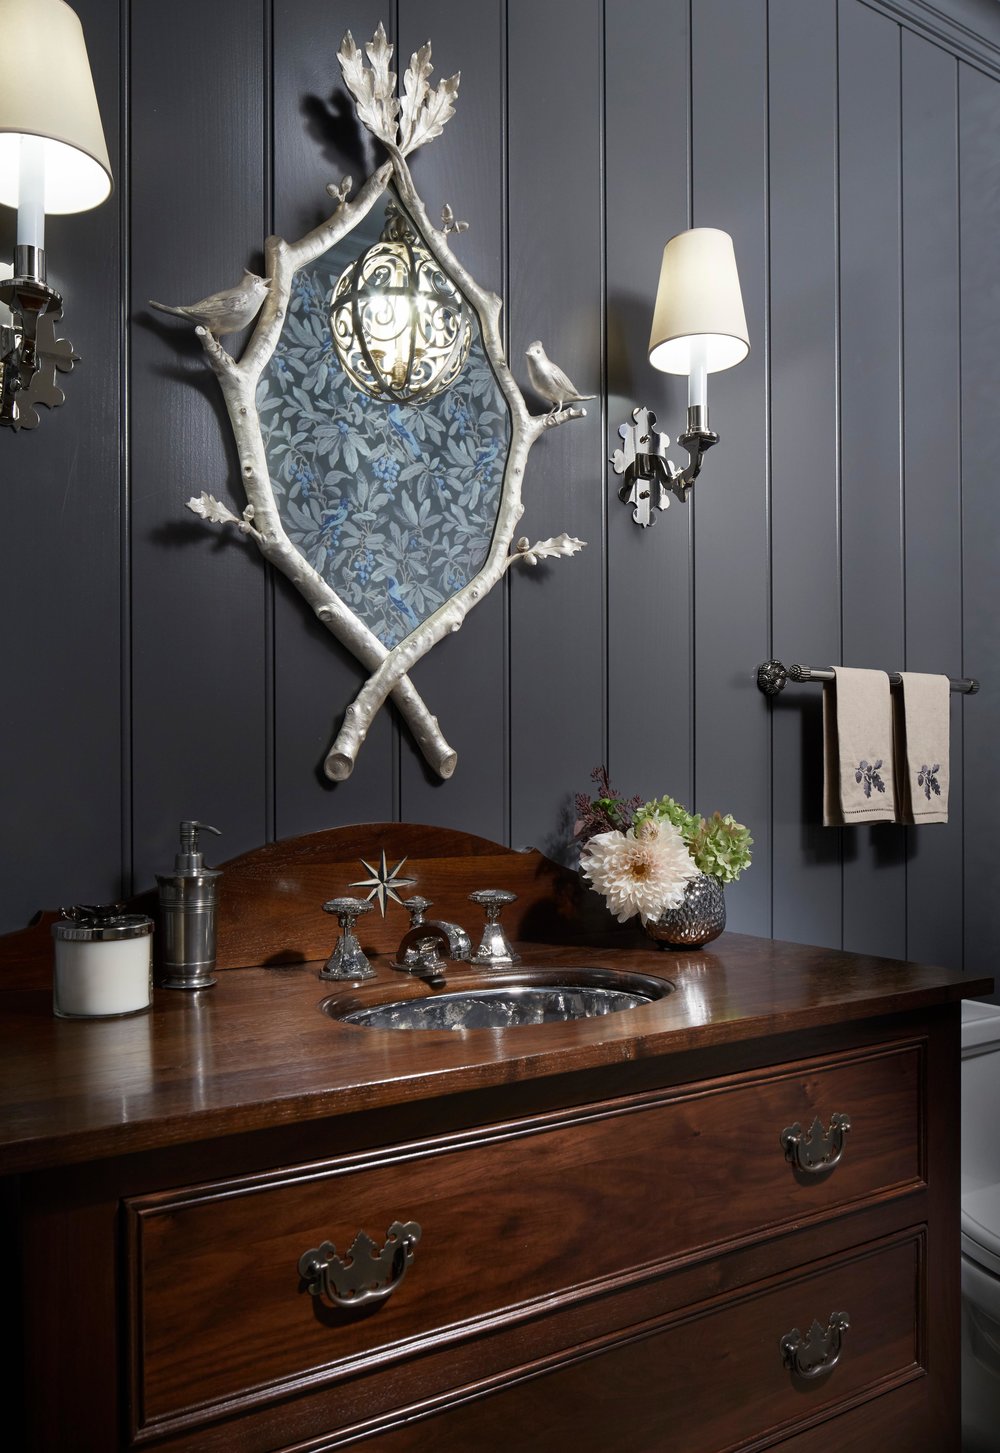 Rich dark painted paneling and wood vanity in a bathroom. Come see more interior design inspiration from Elizabeth Drake. Photo by Werner Straube. #interiordesign #classicdesign #traditionaldecor #housetour #elizabethdrake